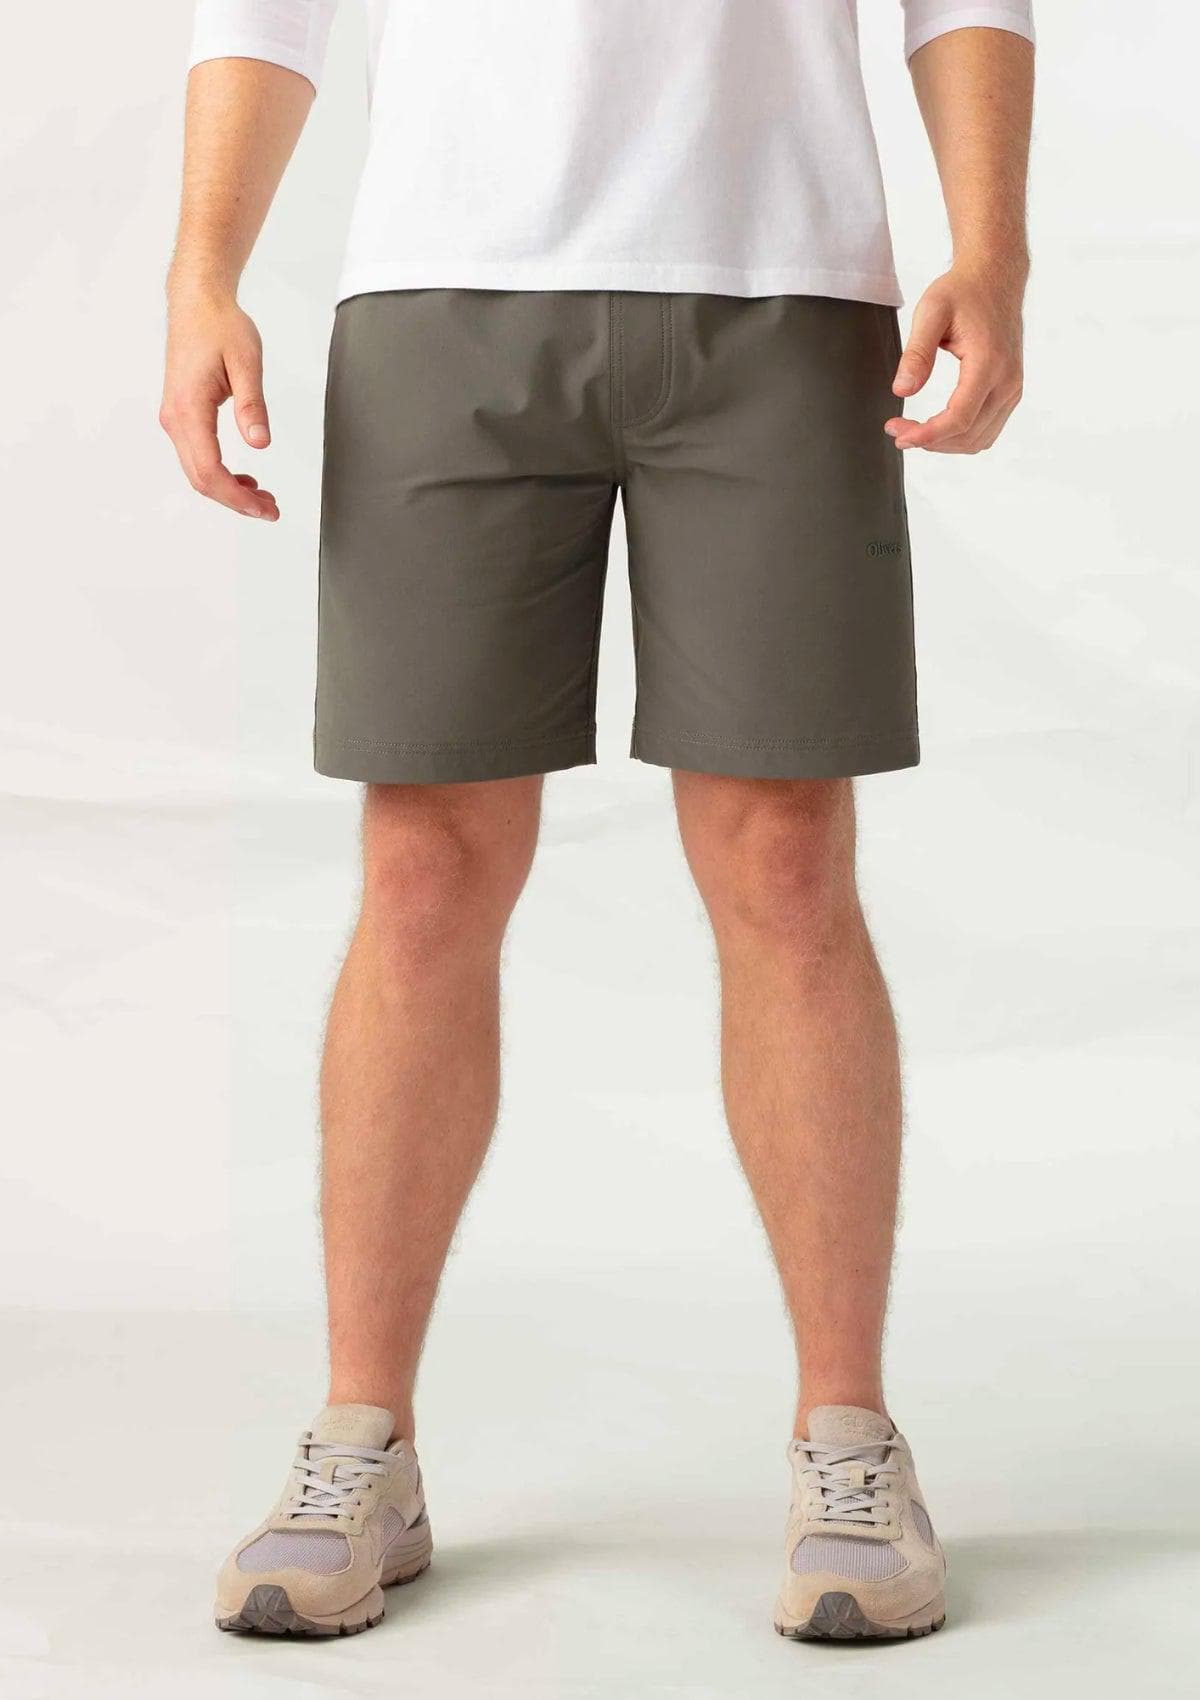 All Over Shorts Lined - Olive